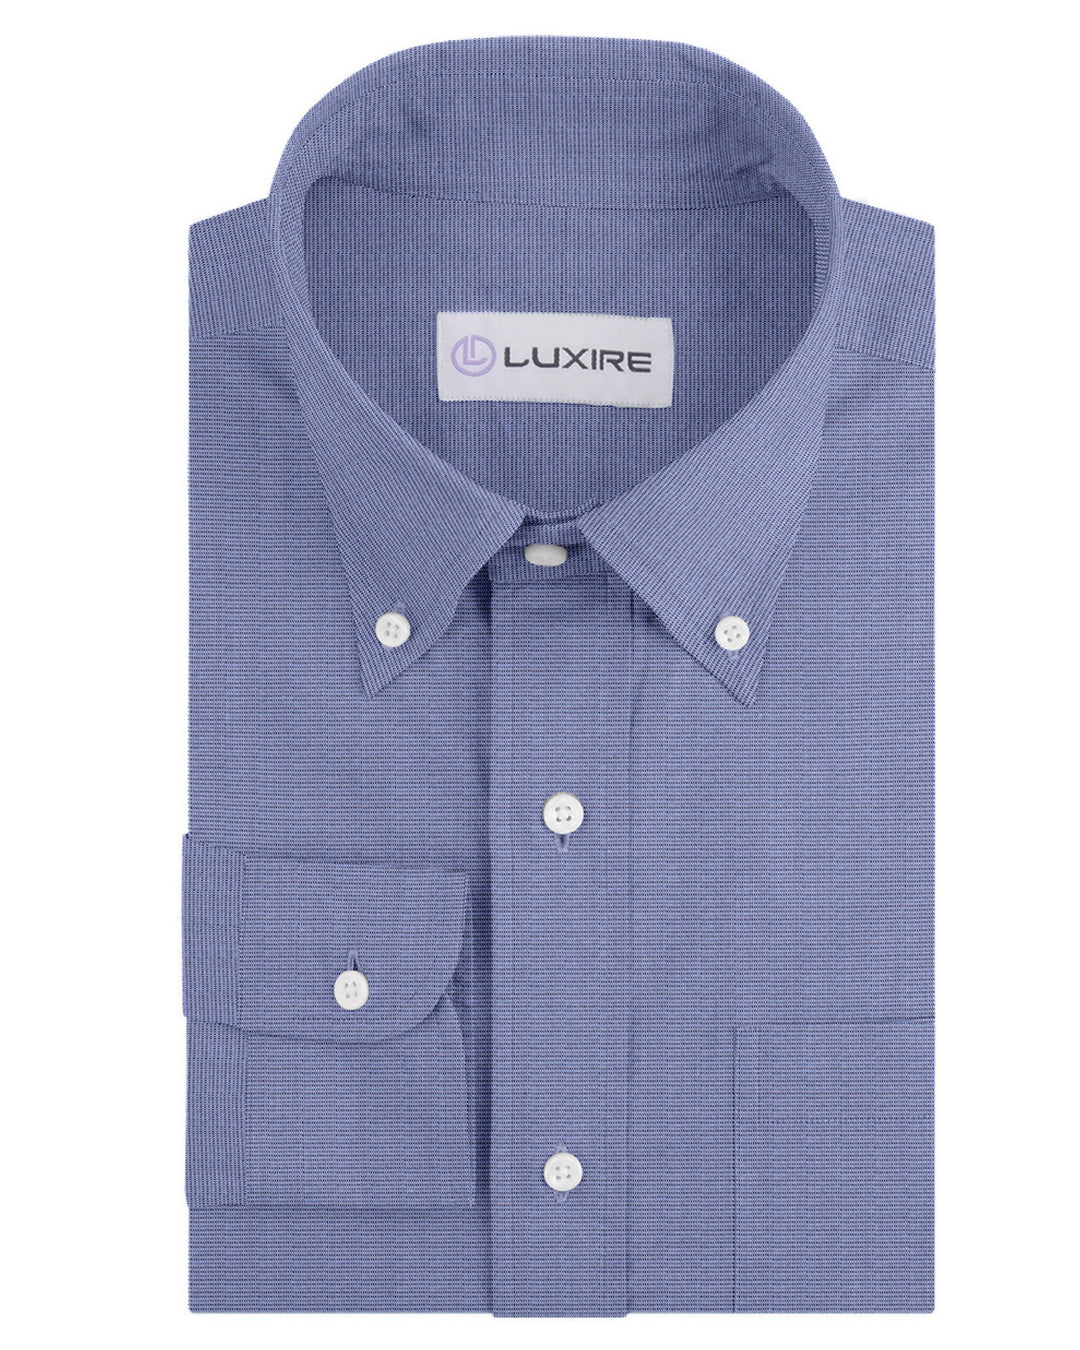 Front of the custom linen shirt for men in mid blue chambray by Luxire Clothing